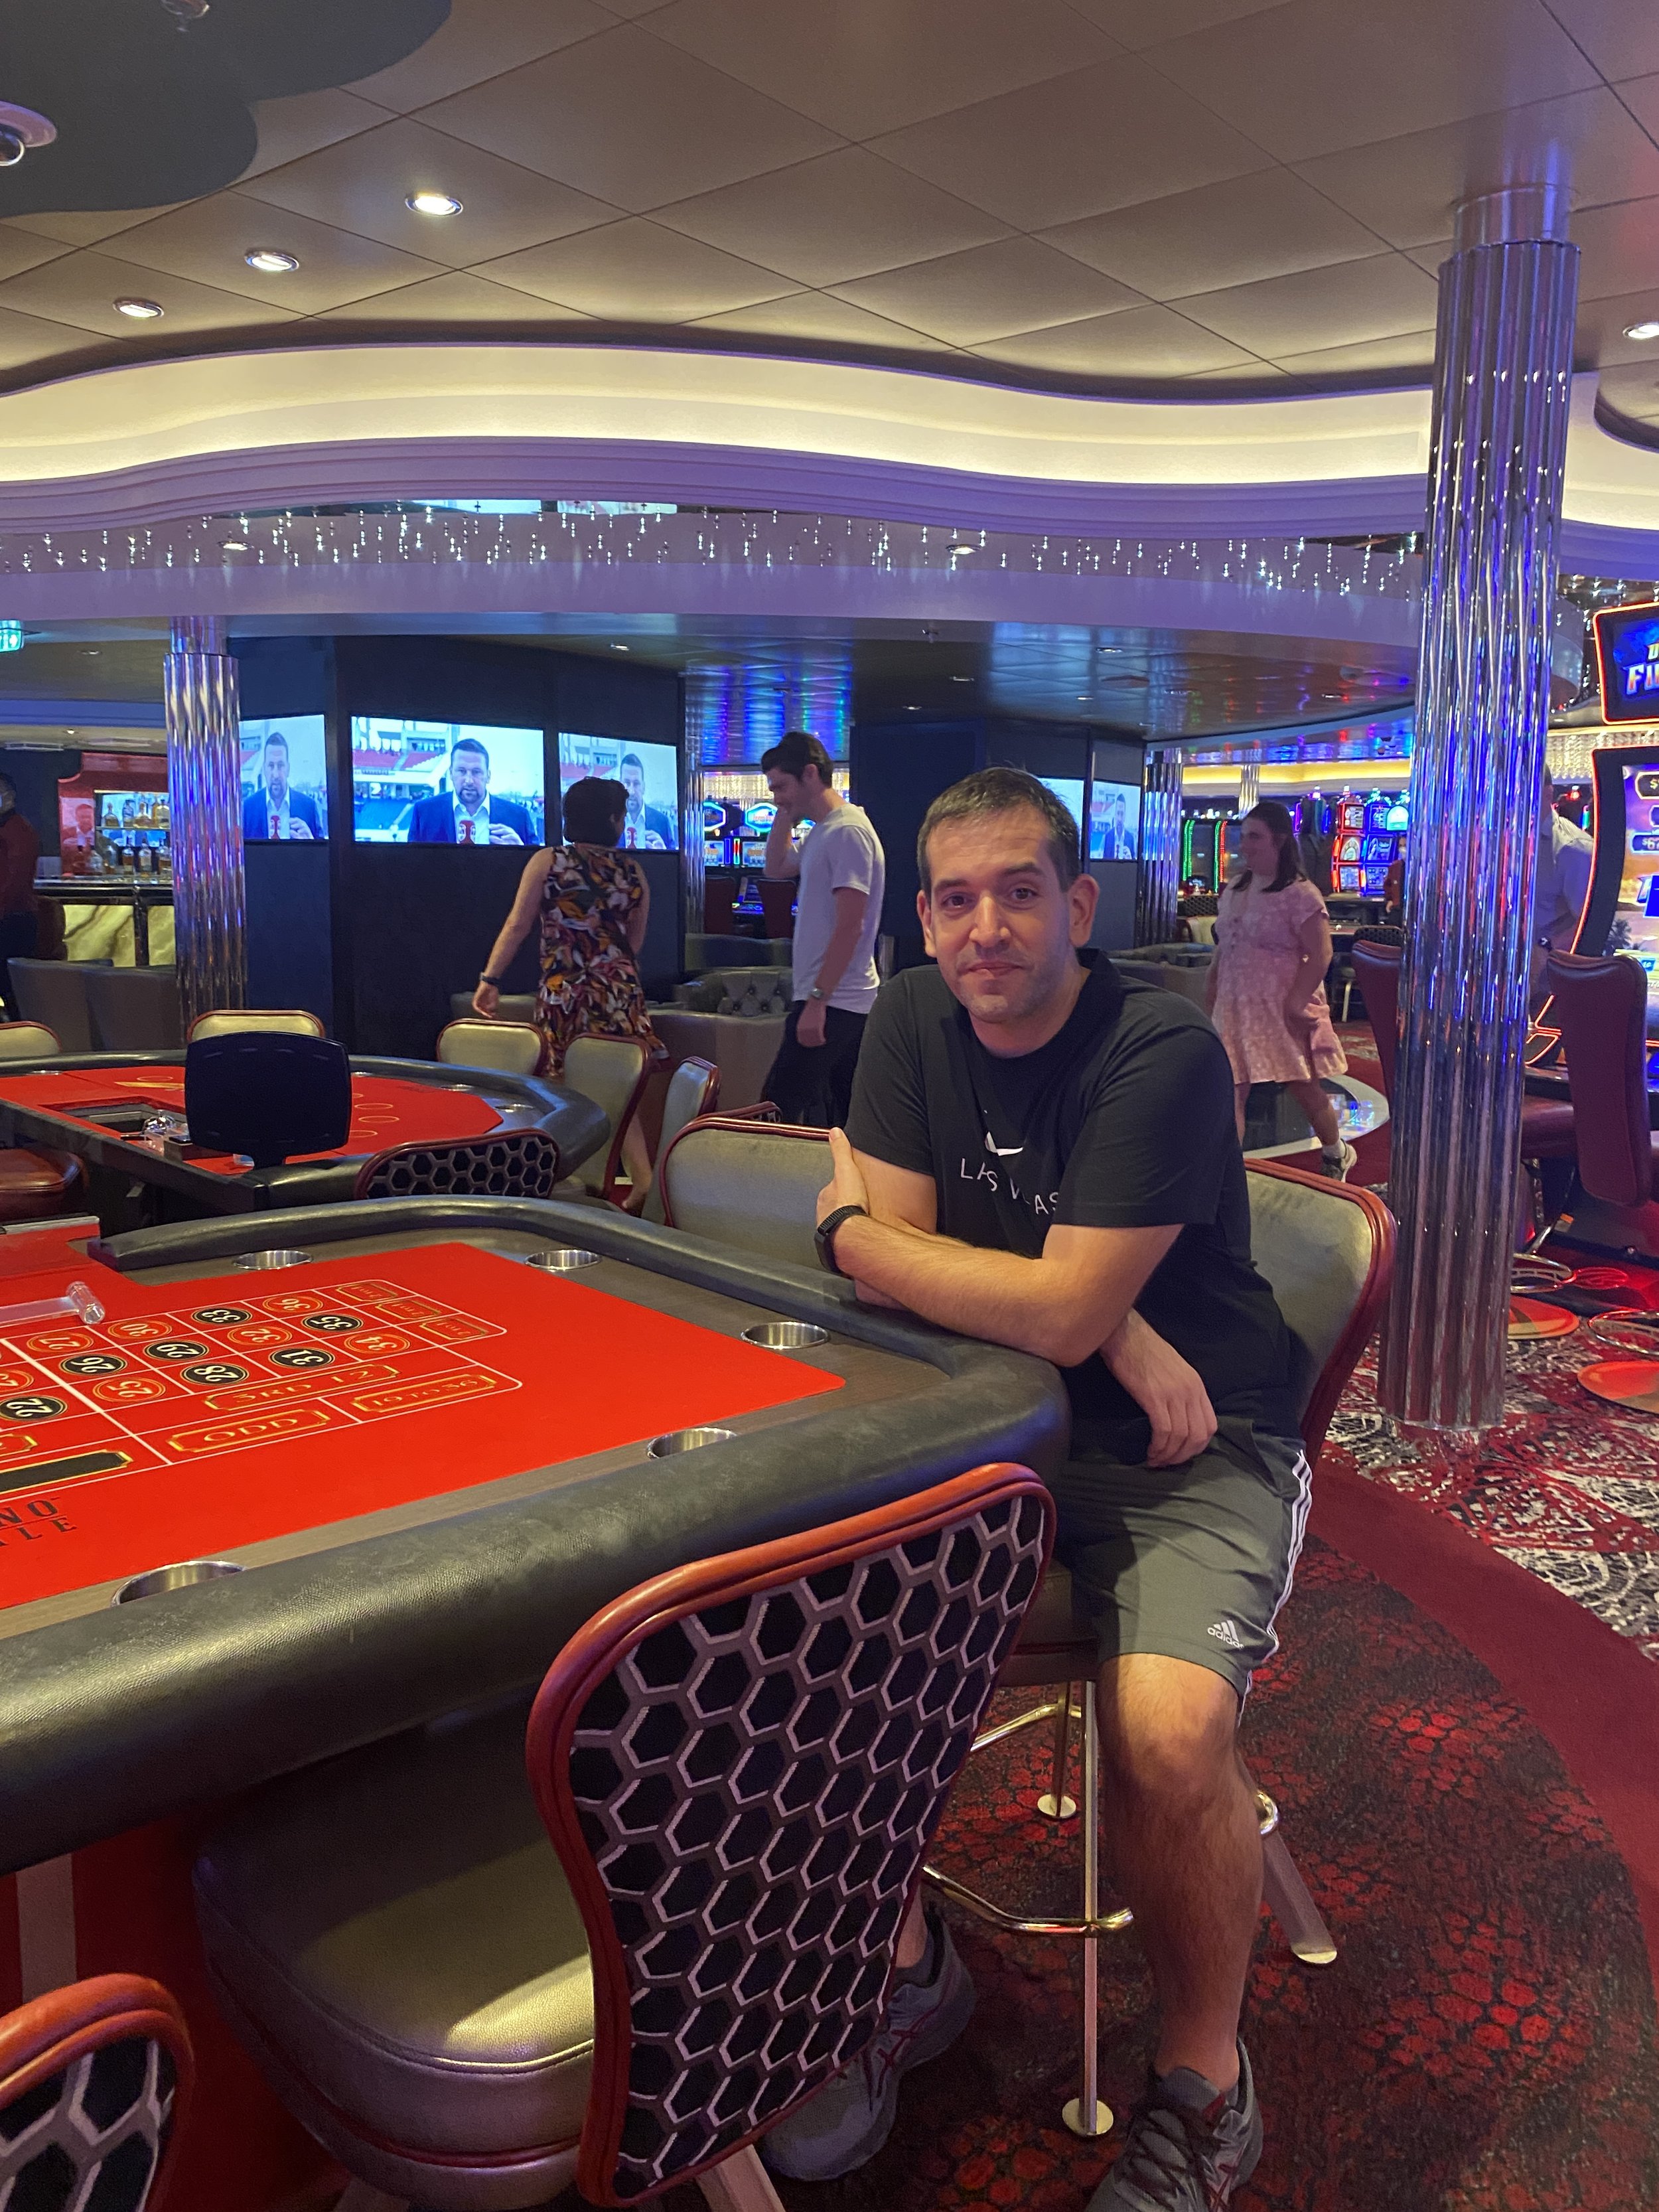  Most table games had $10 minimums, not bad! Penny slots and video poker were also available. The casino is only opened while at sea at while docked at Perfect Day.  Look at that, I’m even wearing my Las Vegas t-shirt - I’m ready!  